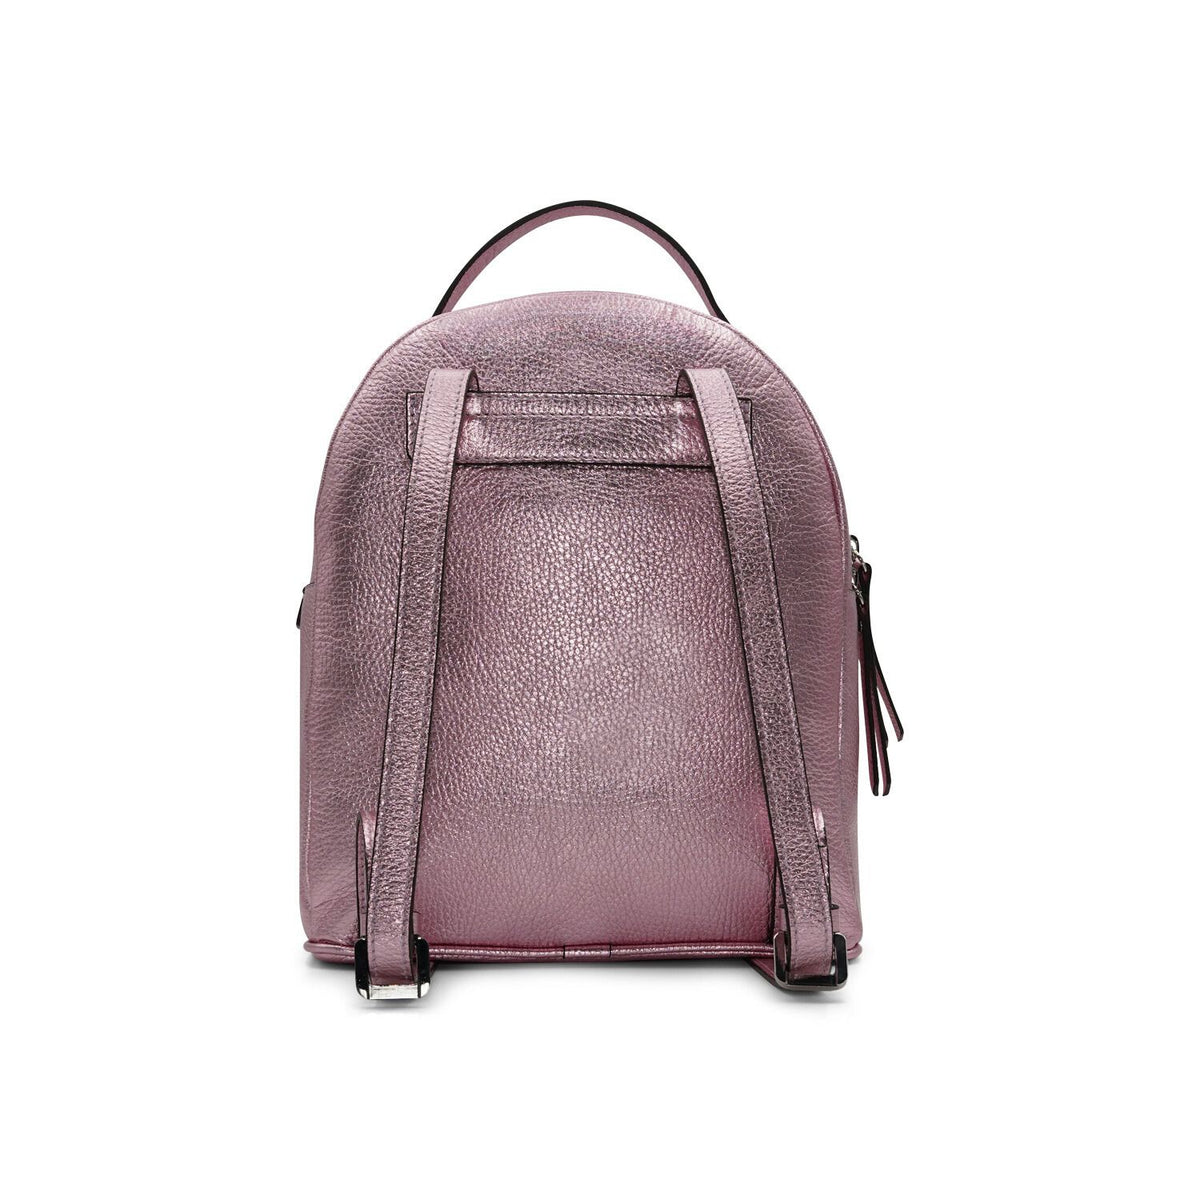 Back At It Backpack - Pink Metallic